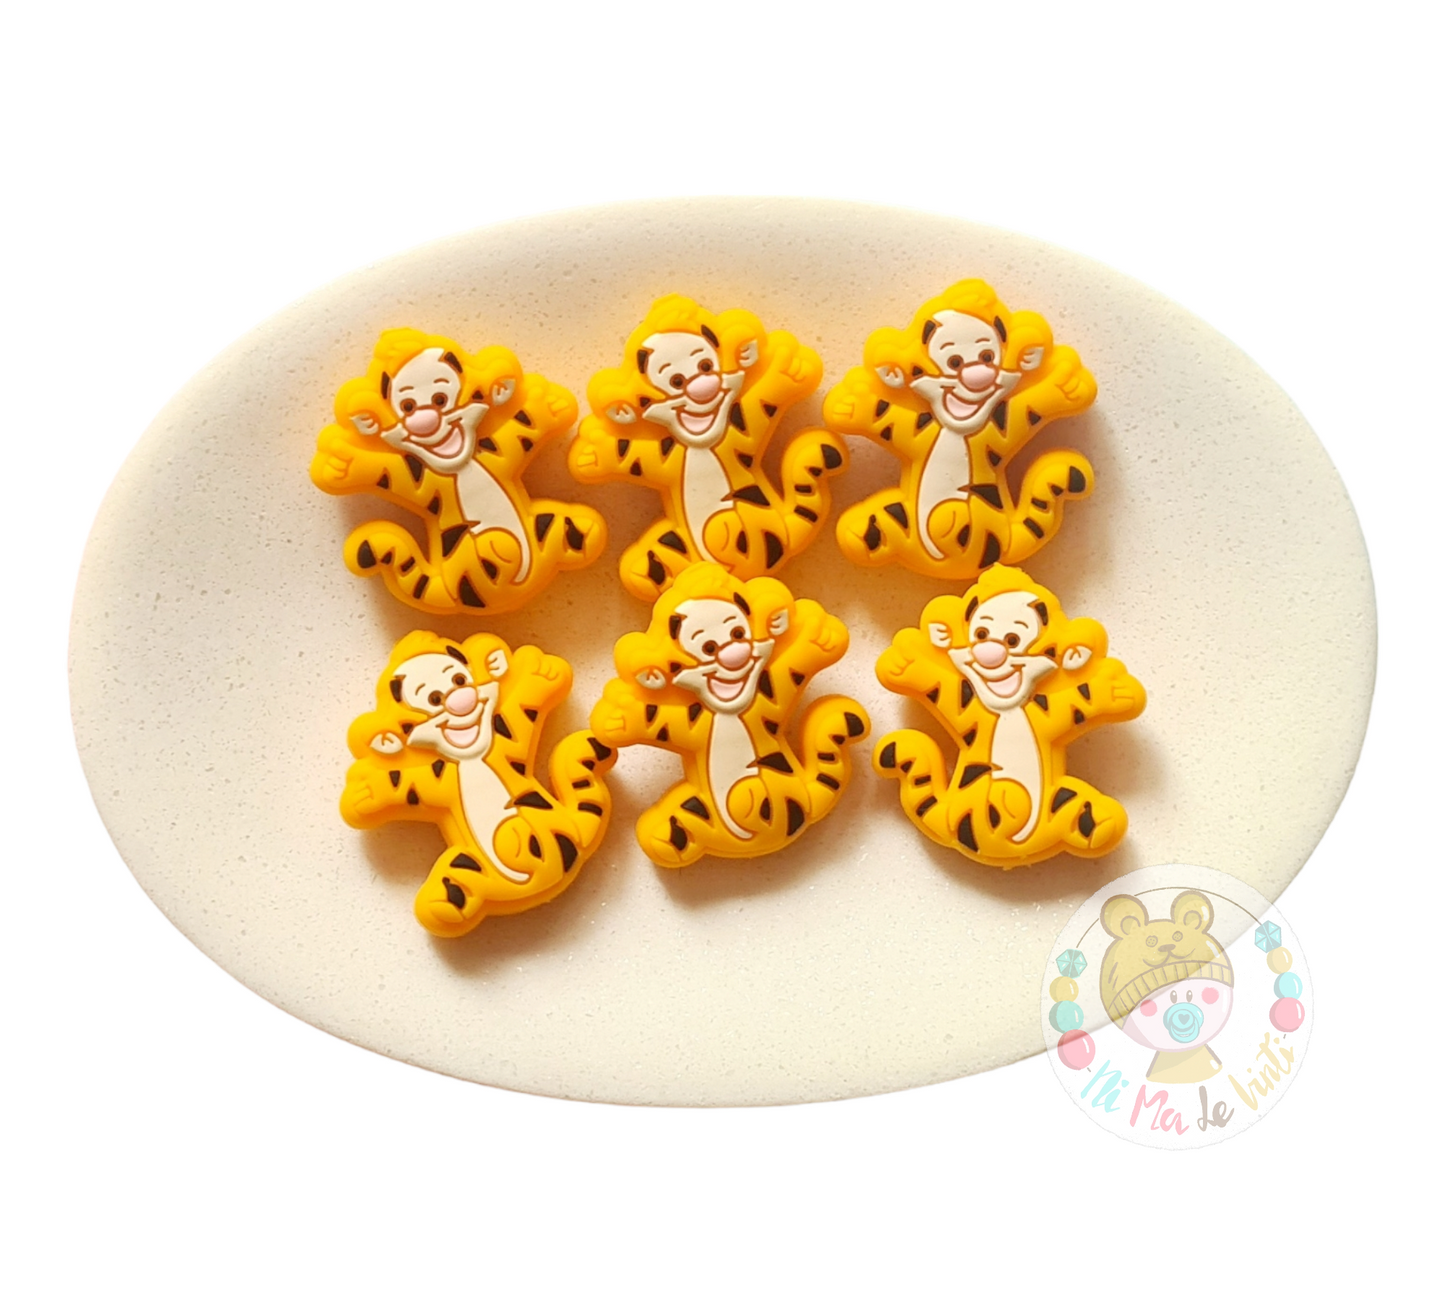 Tiger (Winnie the Pooh) Focal Silicone Bead